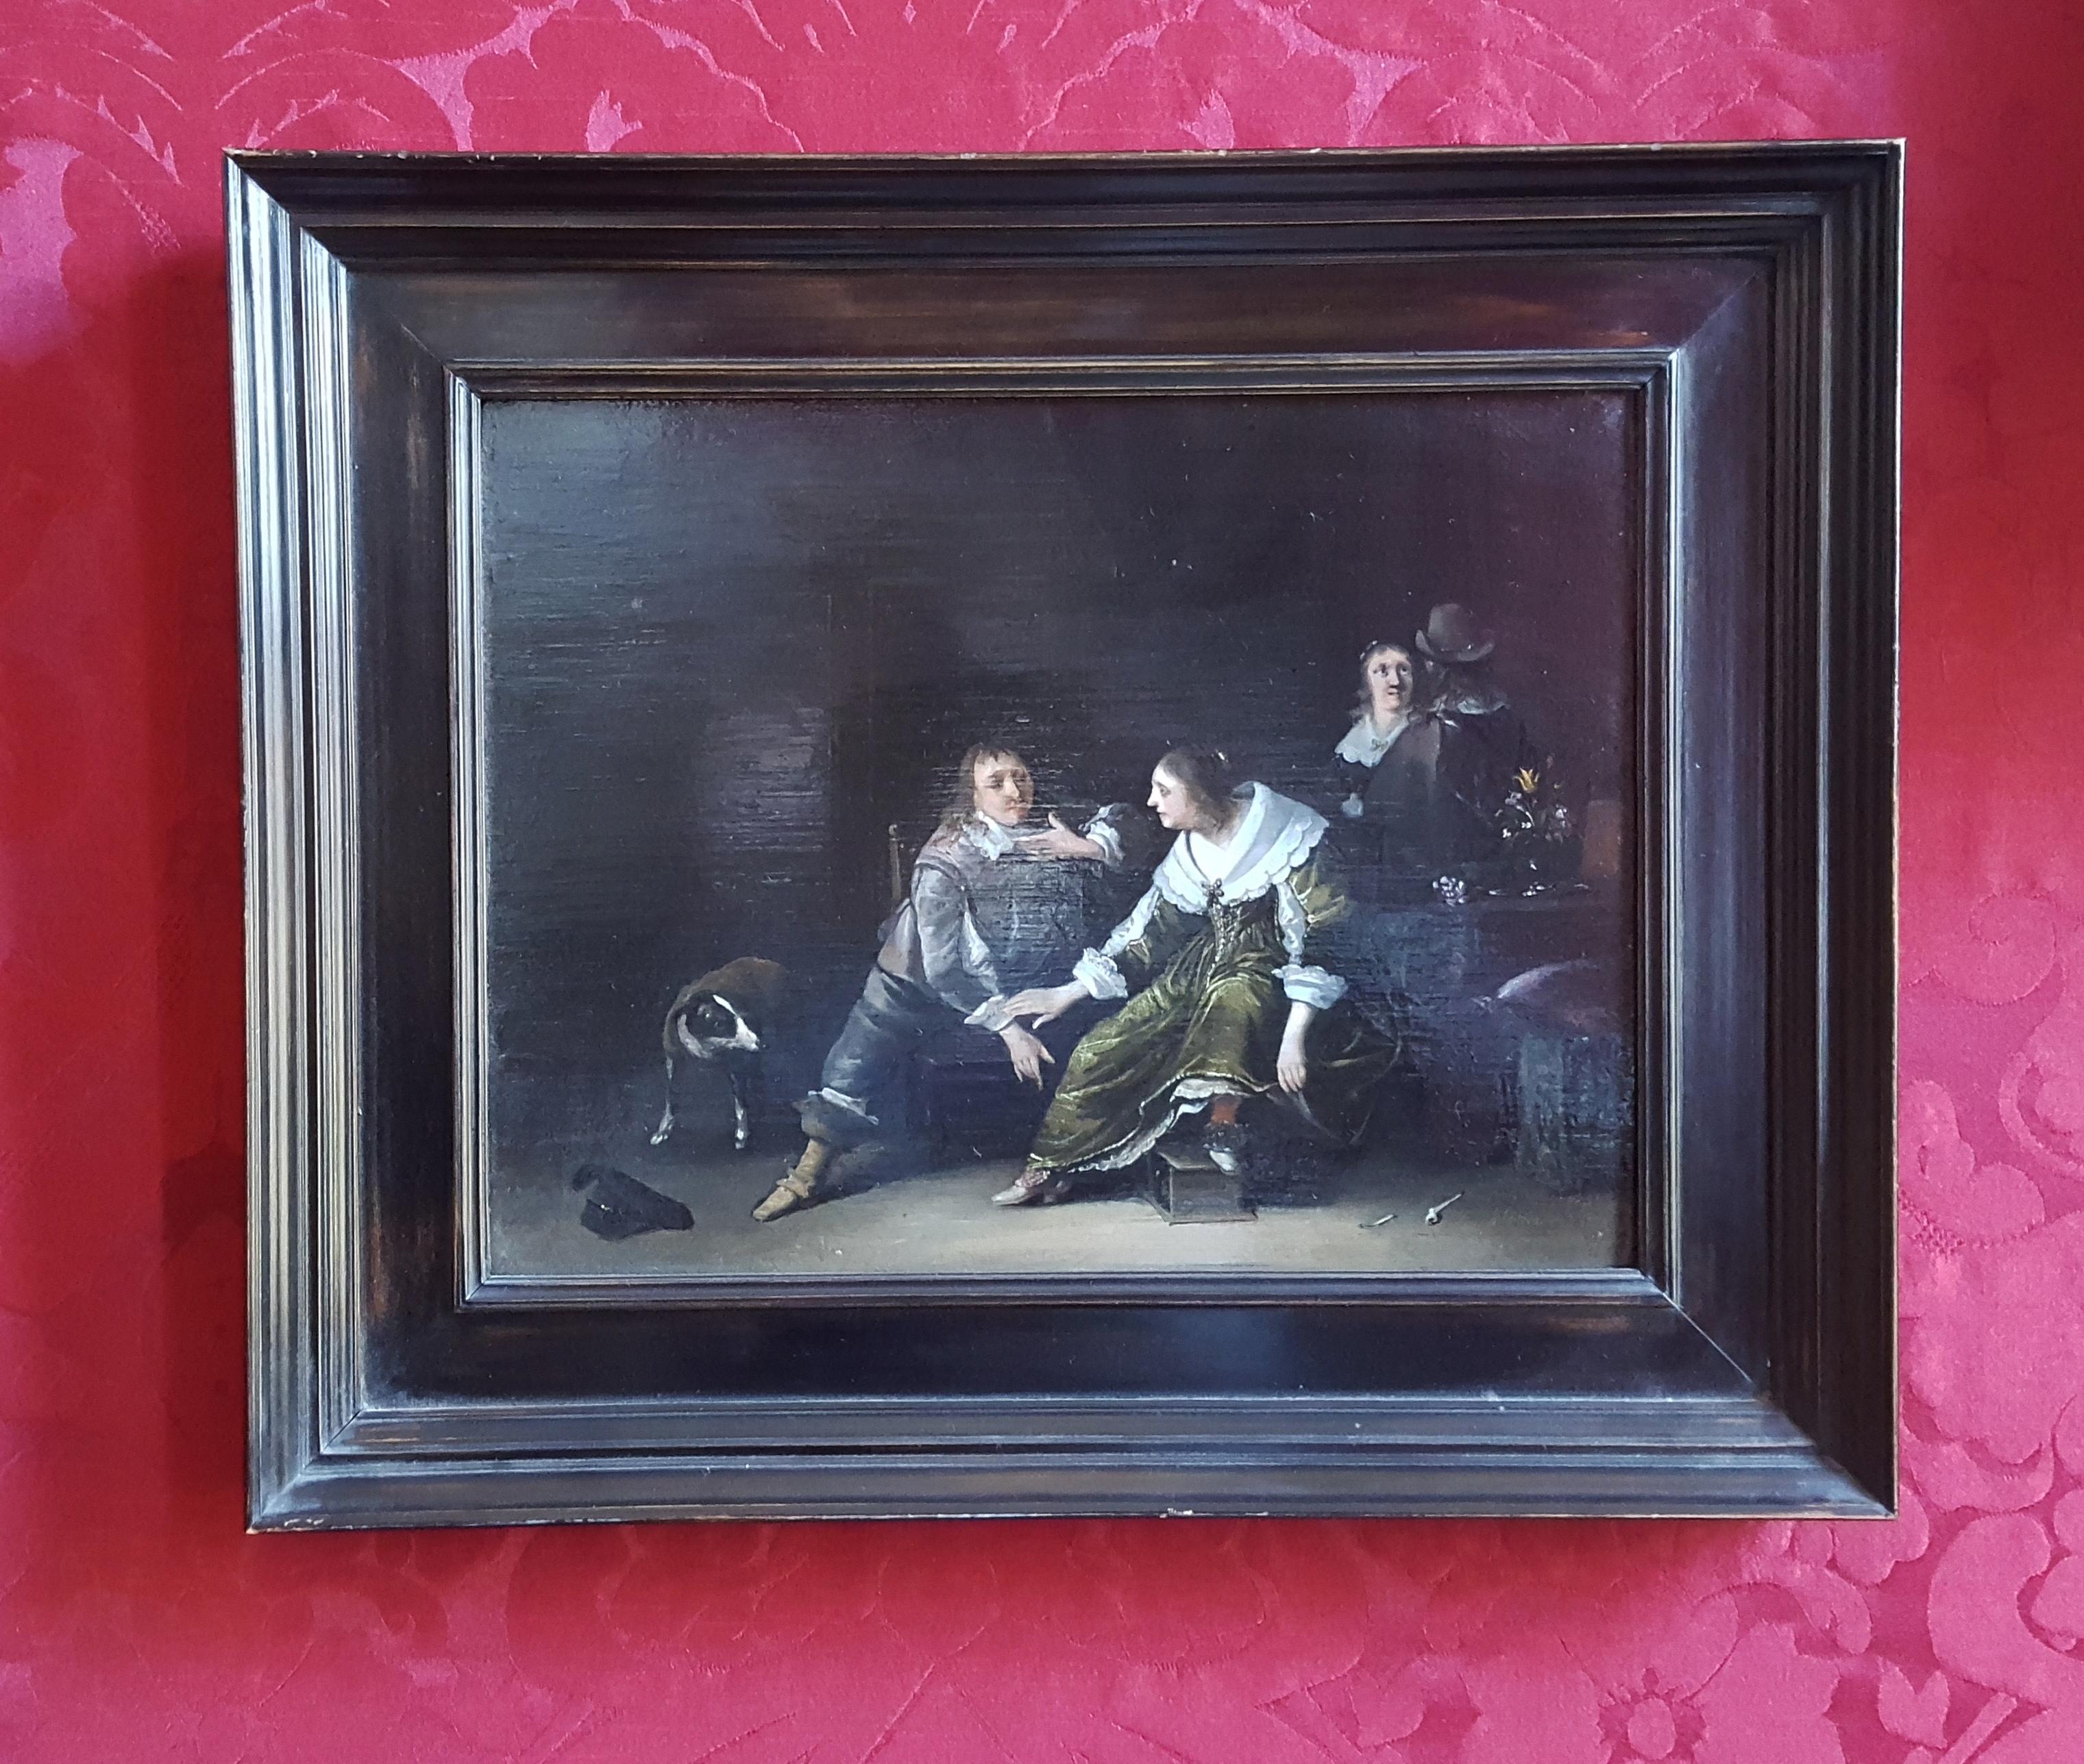 Anthonie Palamedesz (Delft 1601 – 1673 Amsterdam)

Elegant Company in an Interior 

Oil on panel, 23.2 x 30.8 cm (9.1 x 12.1 inch); contained in a high quality ebonized frame of 17th-century Dutch model

Inscriptions and labels
Indistinctly signed